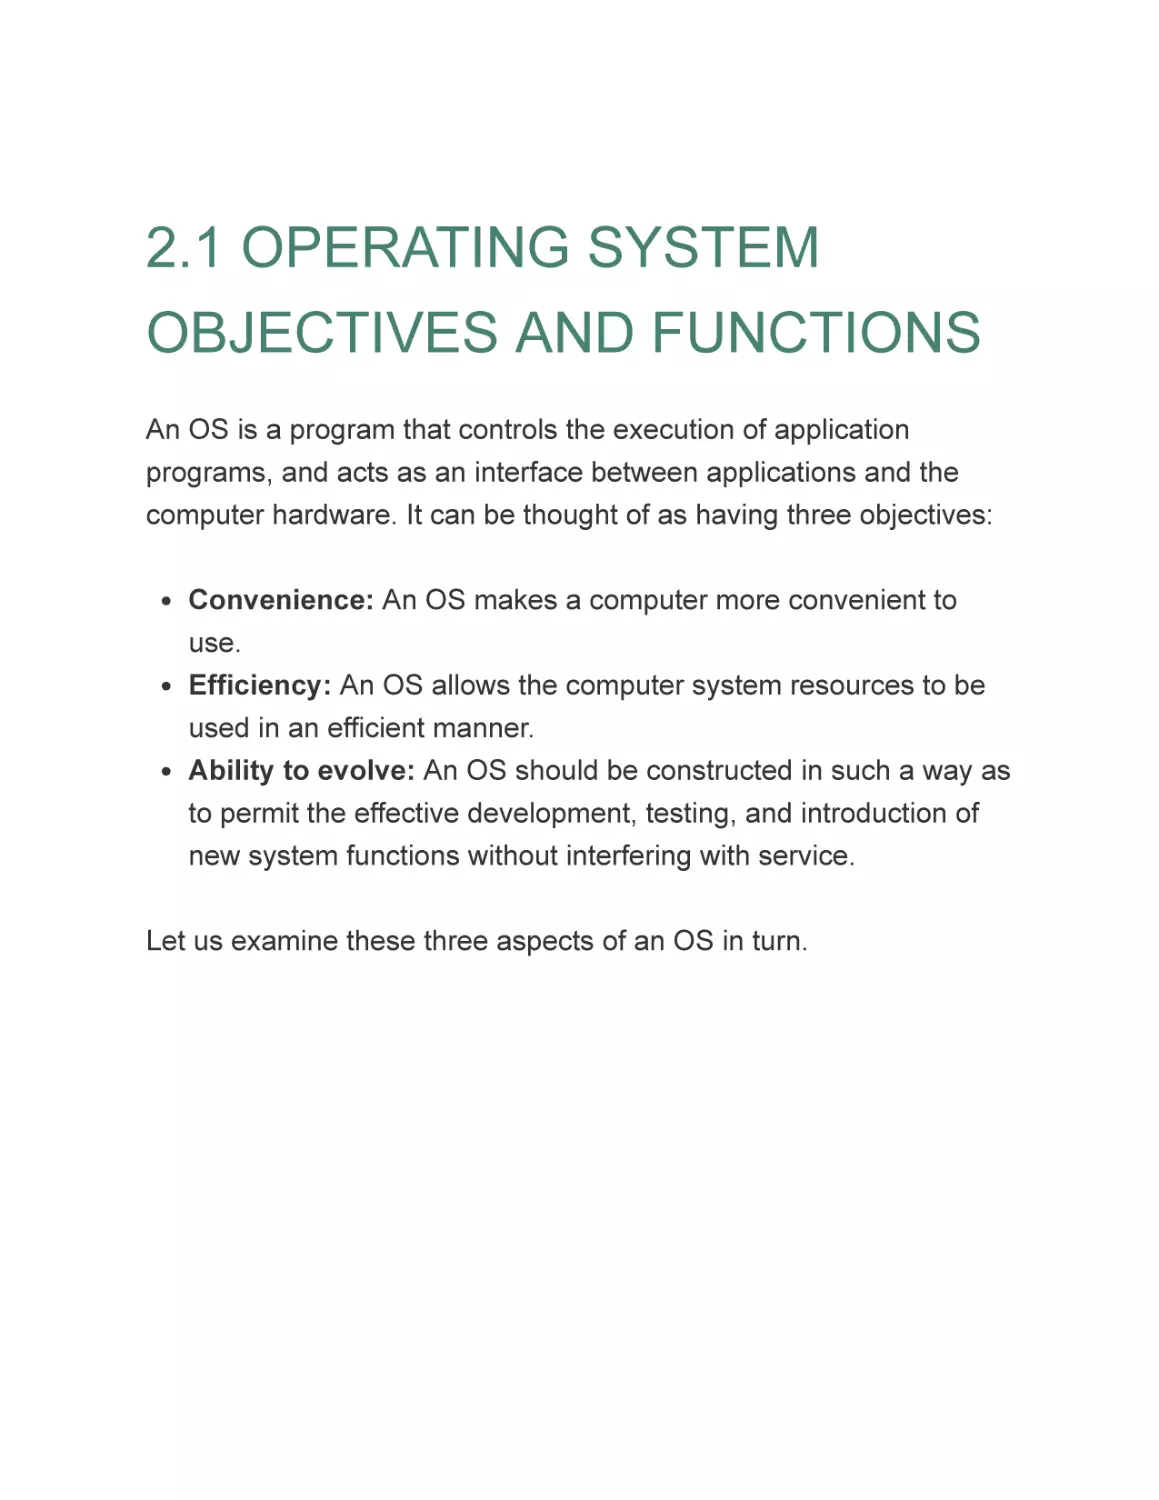 2.1 OPERATING SYSTEM OBJECTIVES AND FUNCTIONS